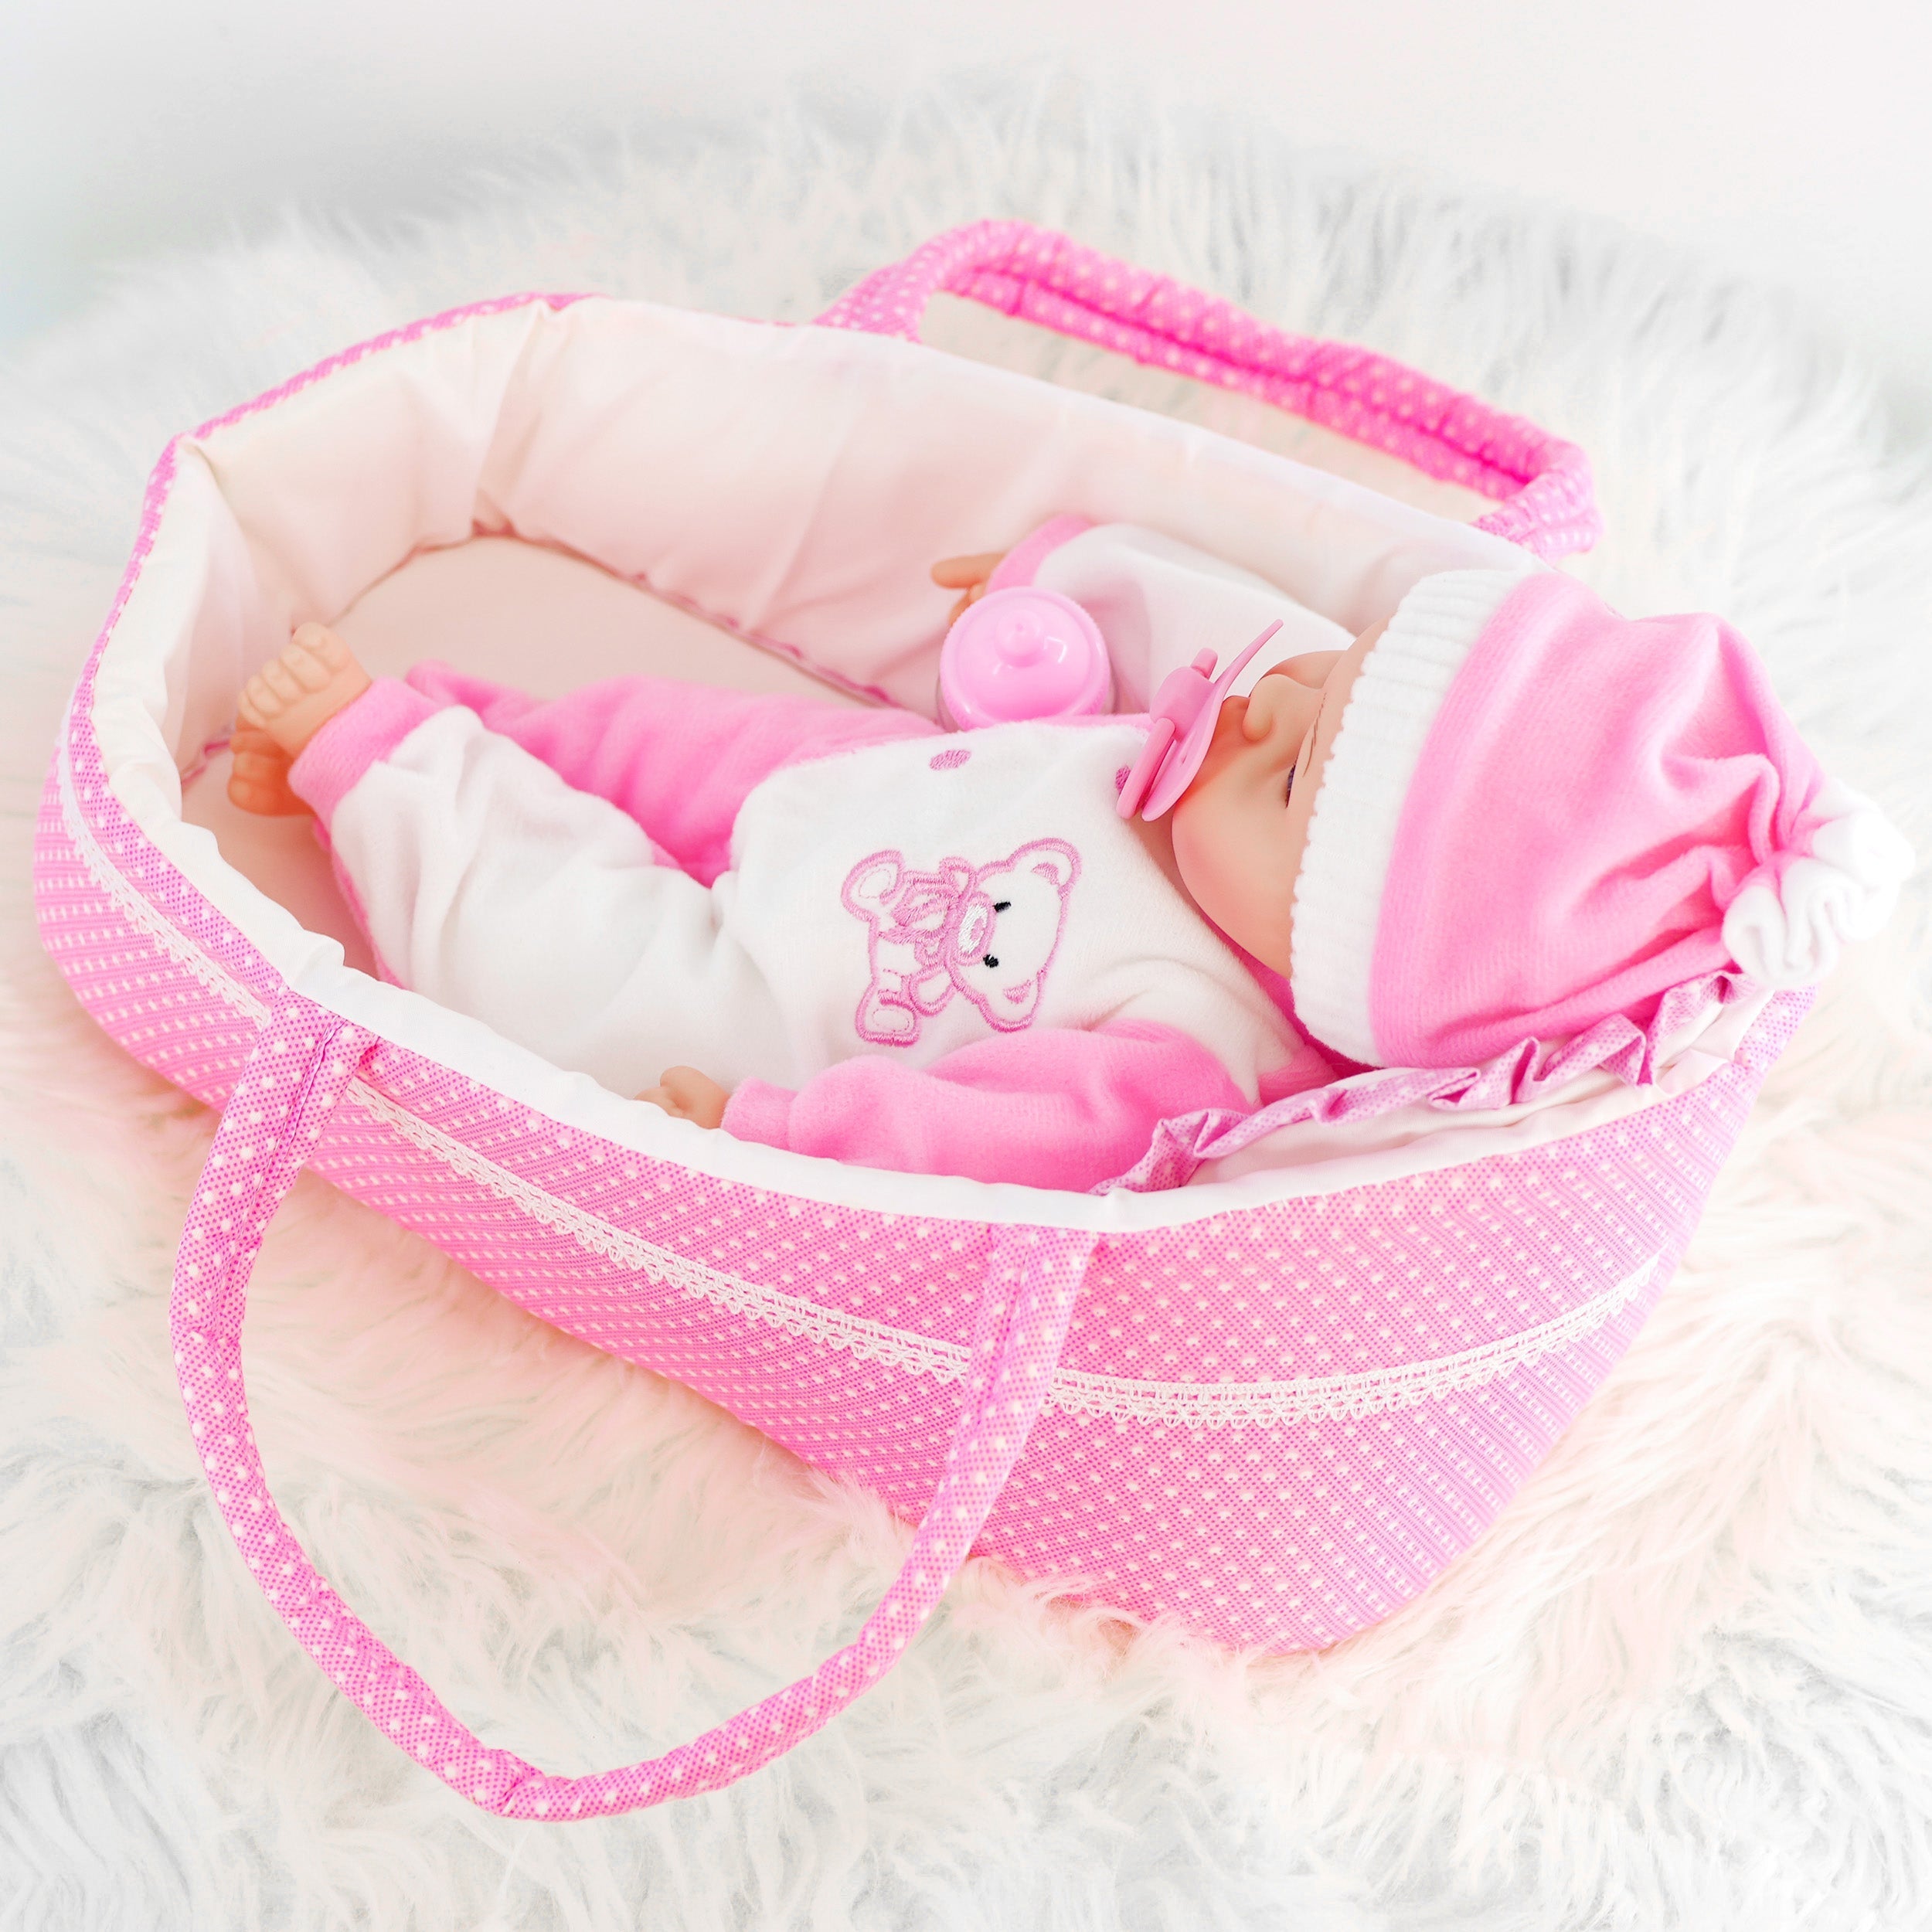 BiBi Doll Baby Doll Accessories Pink Baby Dolls Carry Cot Bed